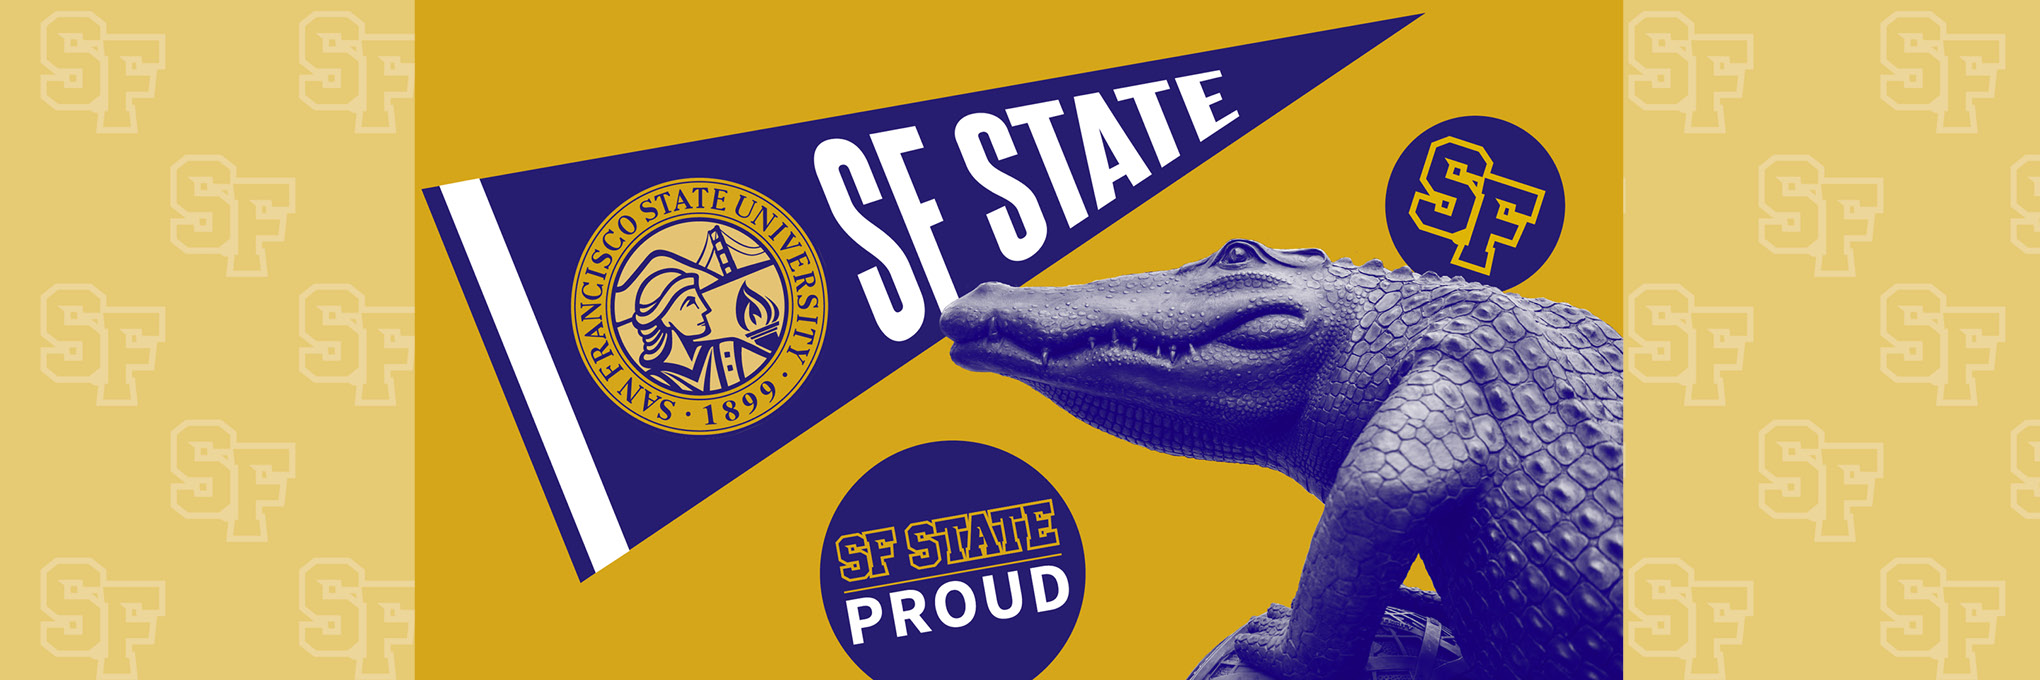 SF State Welcome banner